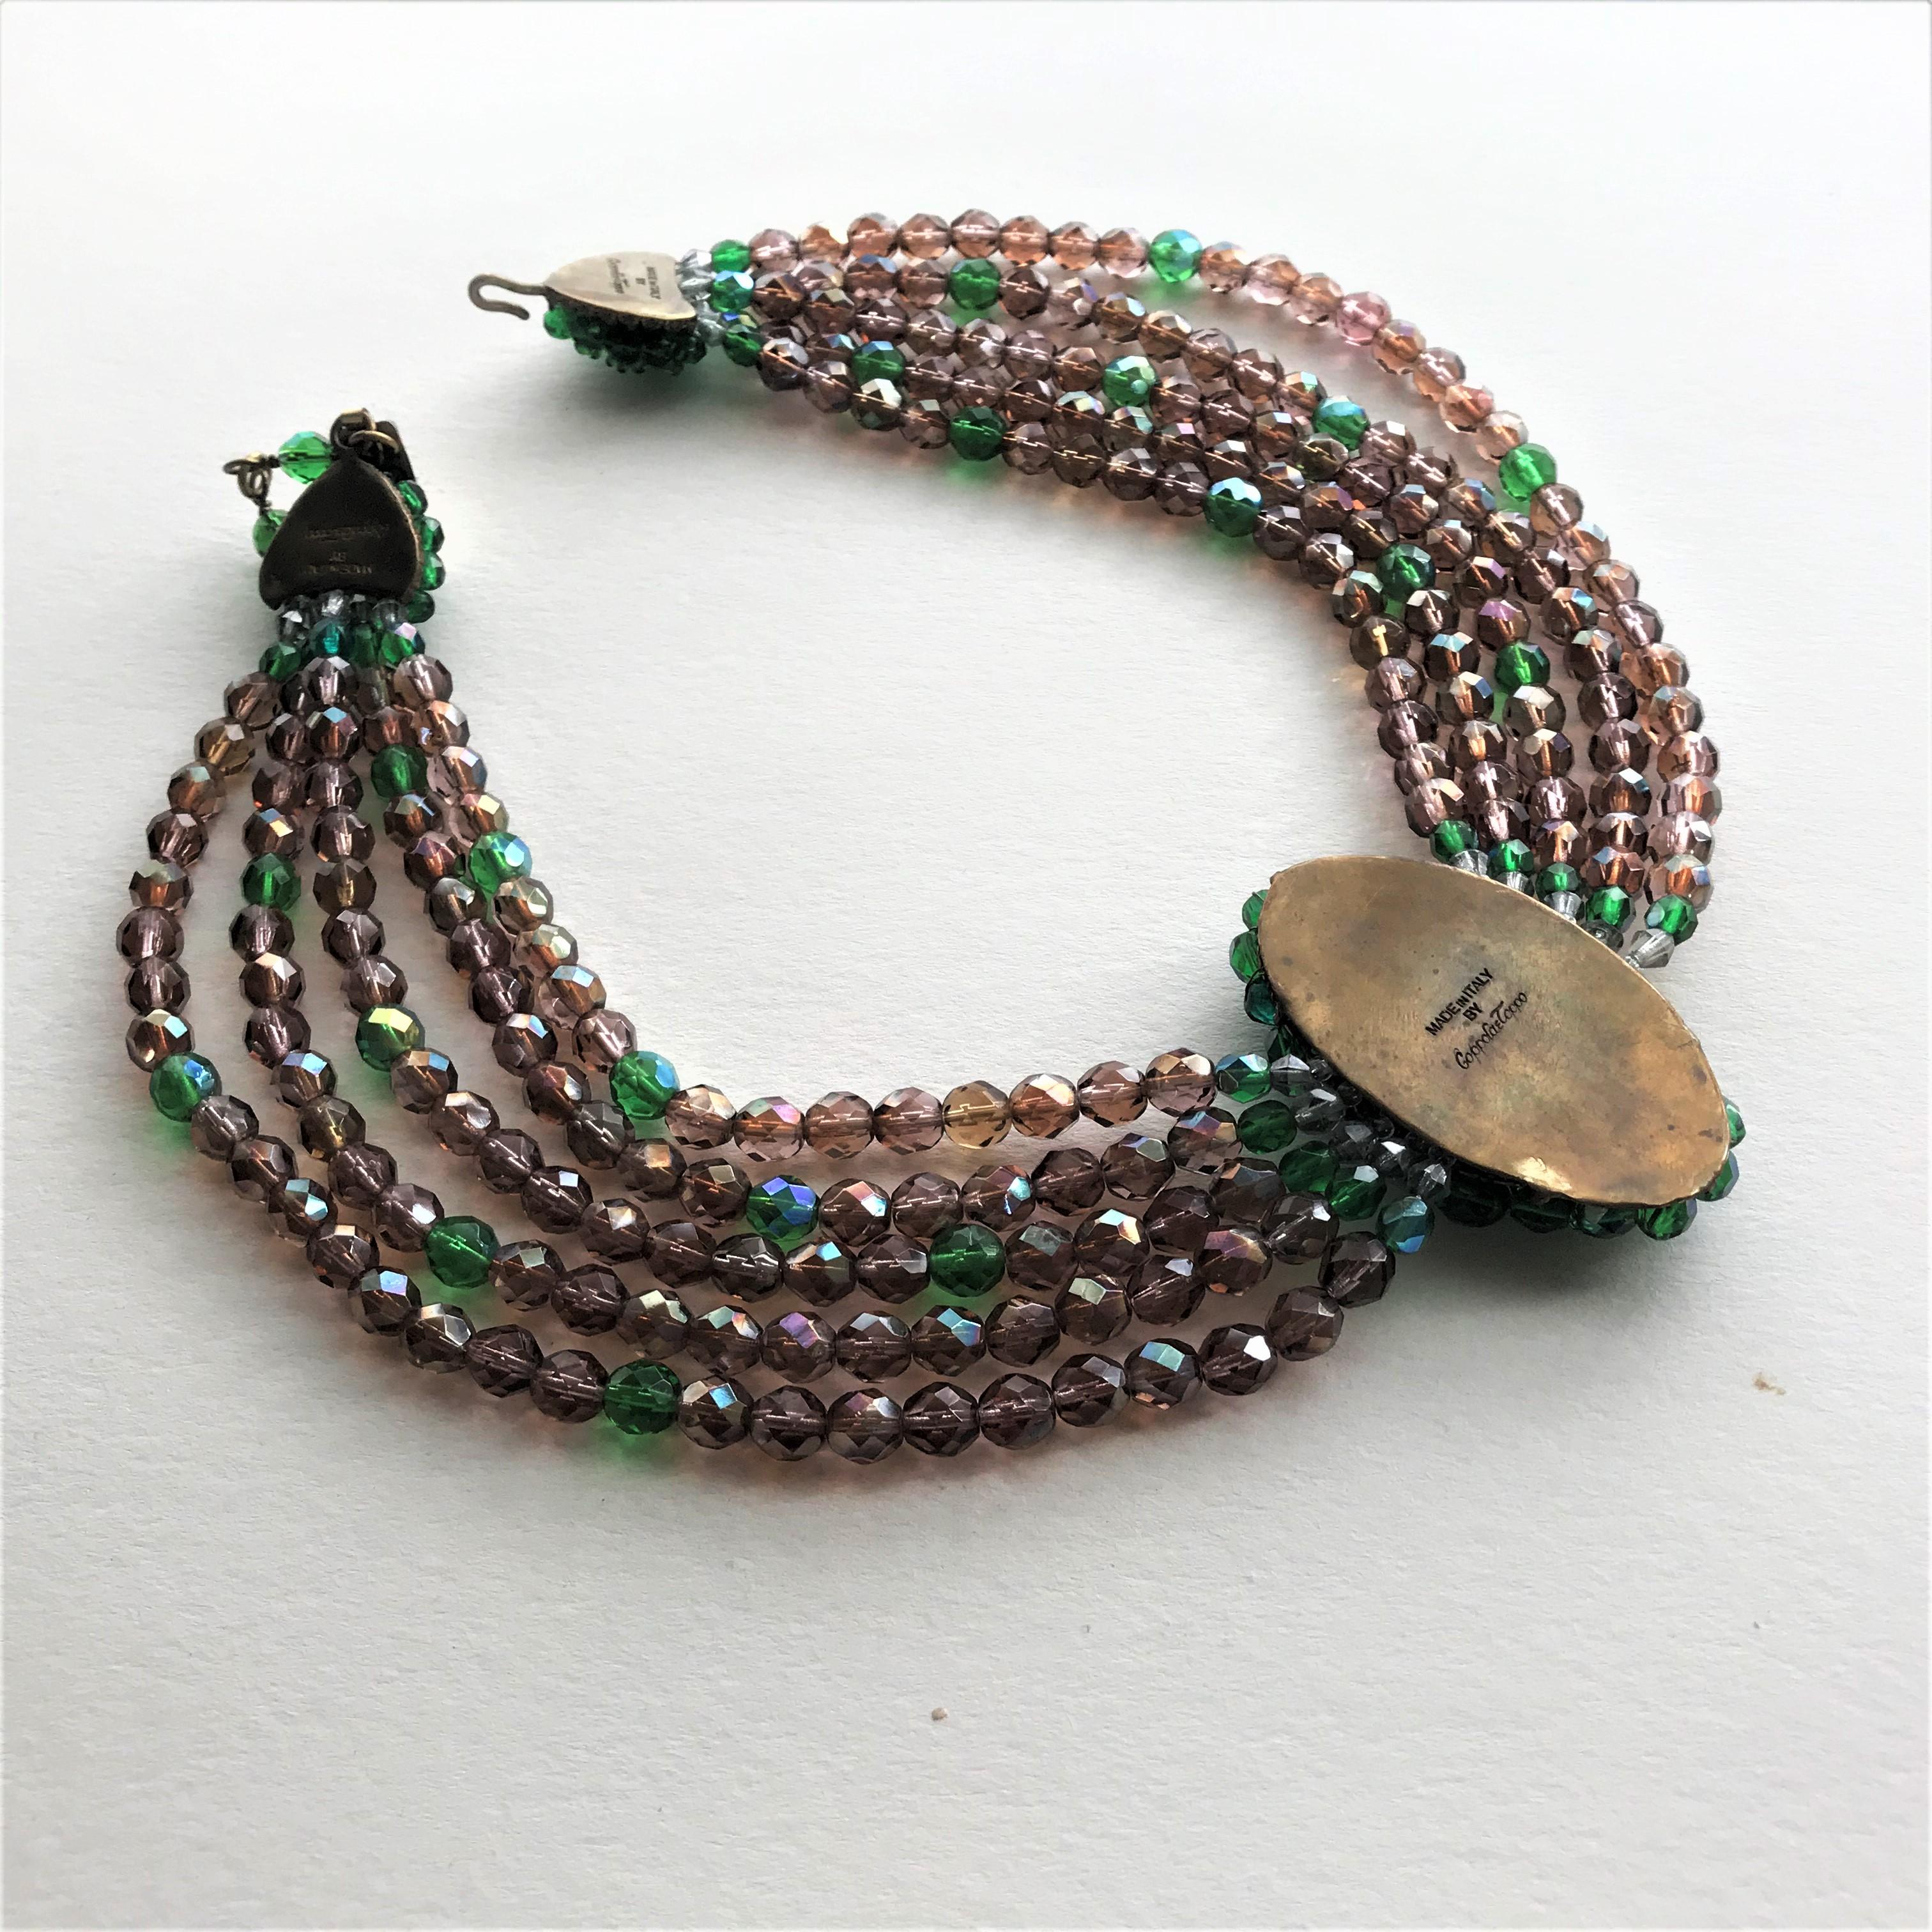 Impressive 5 row crystal necklace in brown and green cut Crystal stones. Elaborate hand beaded clasp with signature and the hand beaded  
green  oval middle part also with the 'MADE OF ITALY BY Coppola & Toppo''. The brown, cut stones are slightly